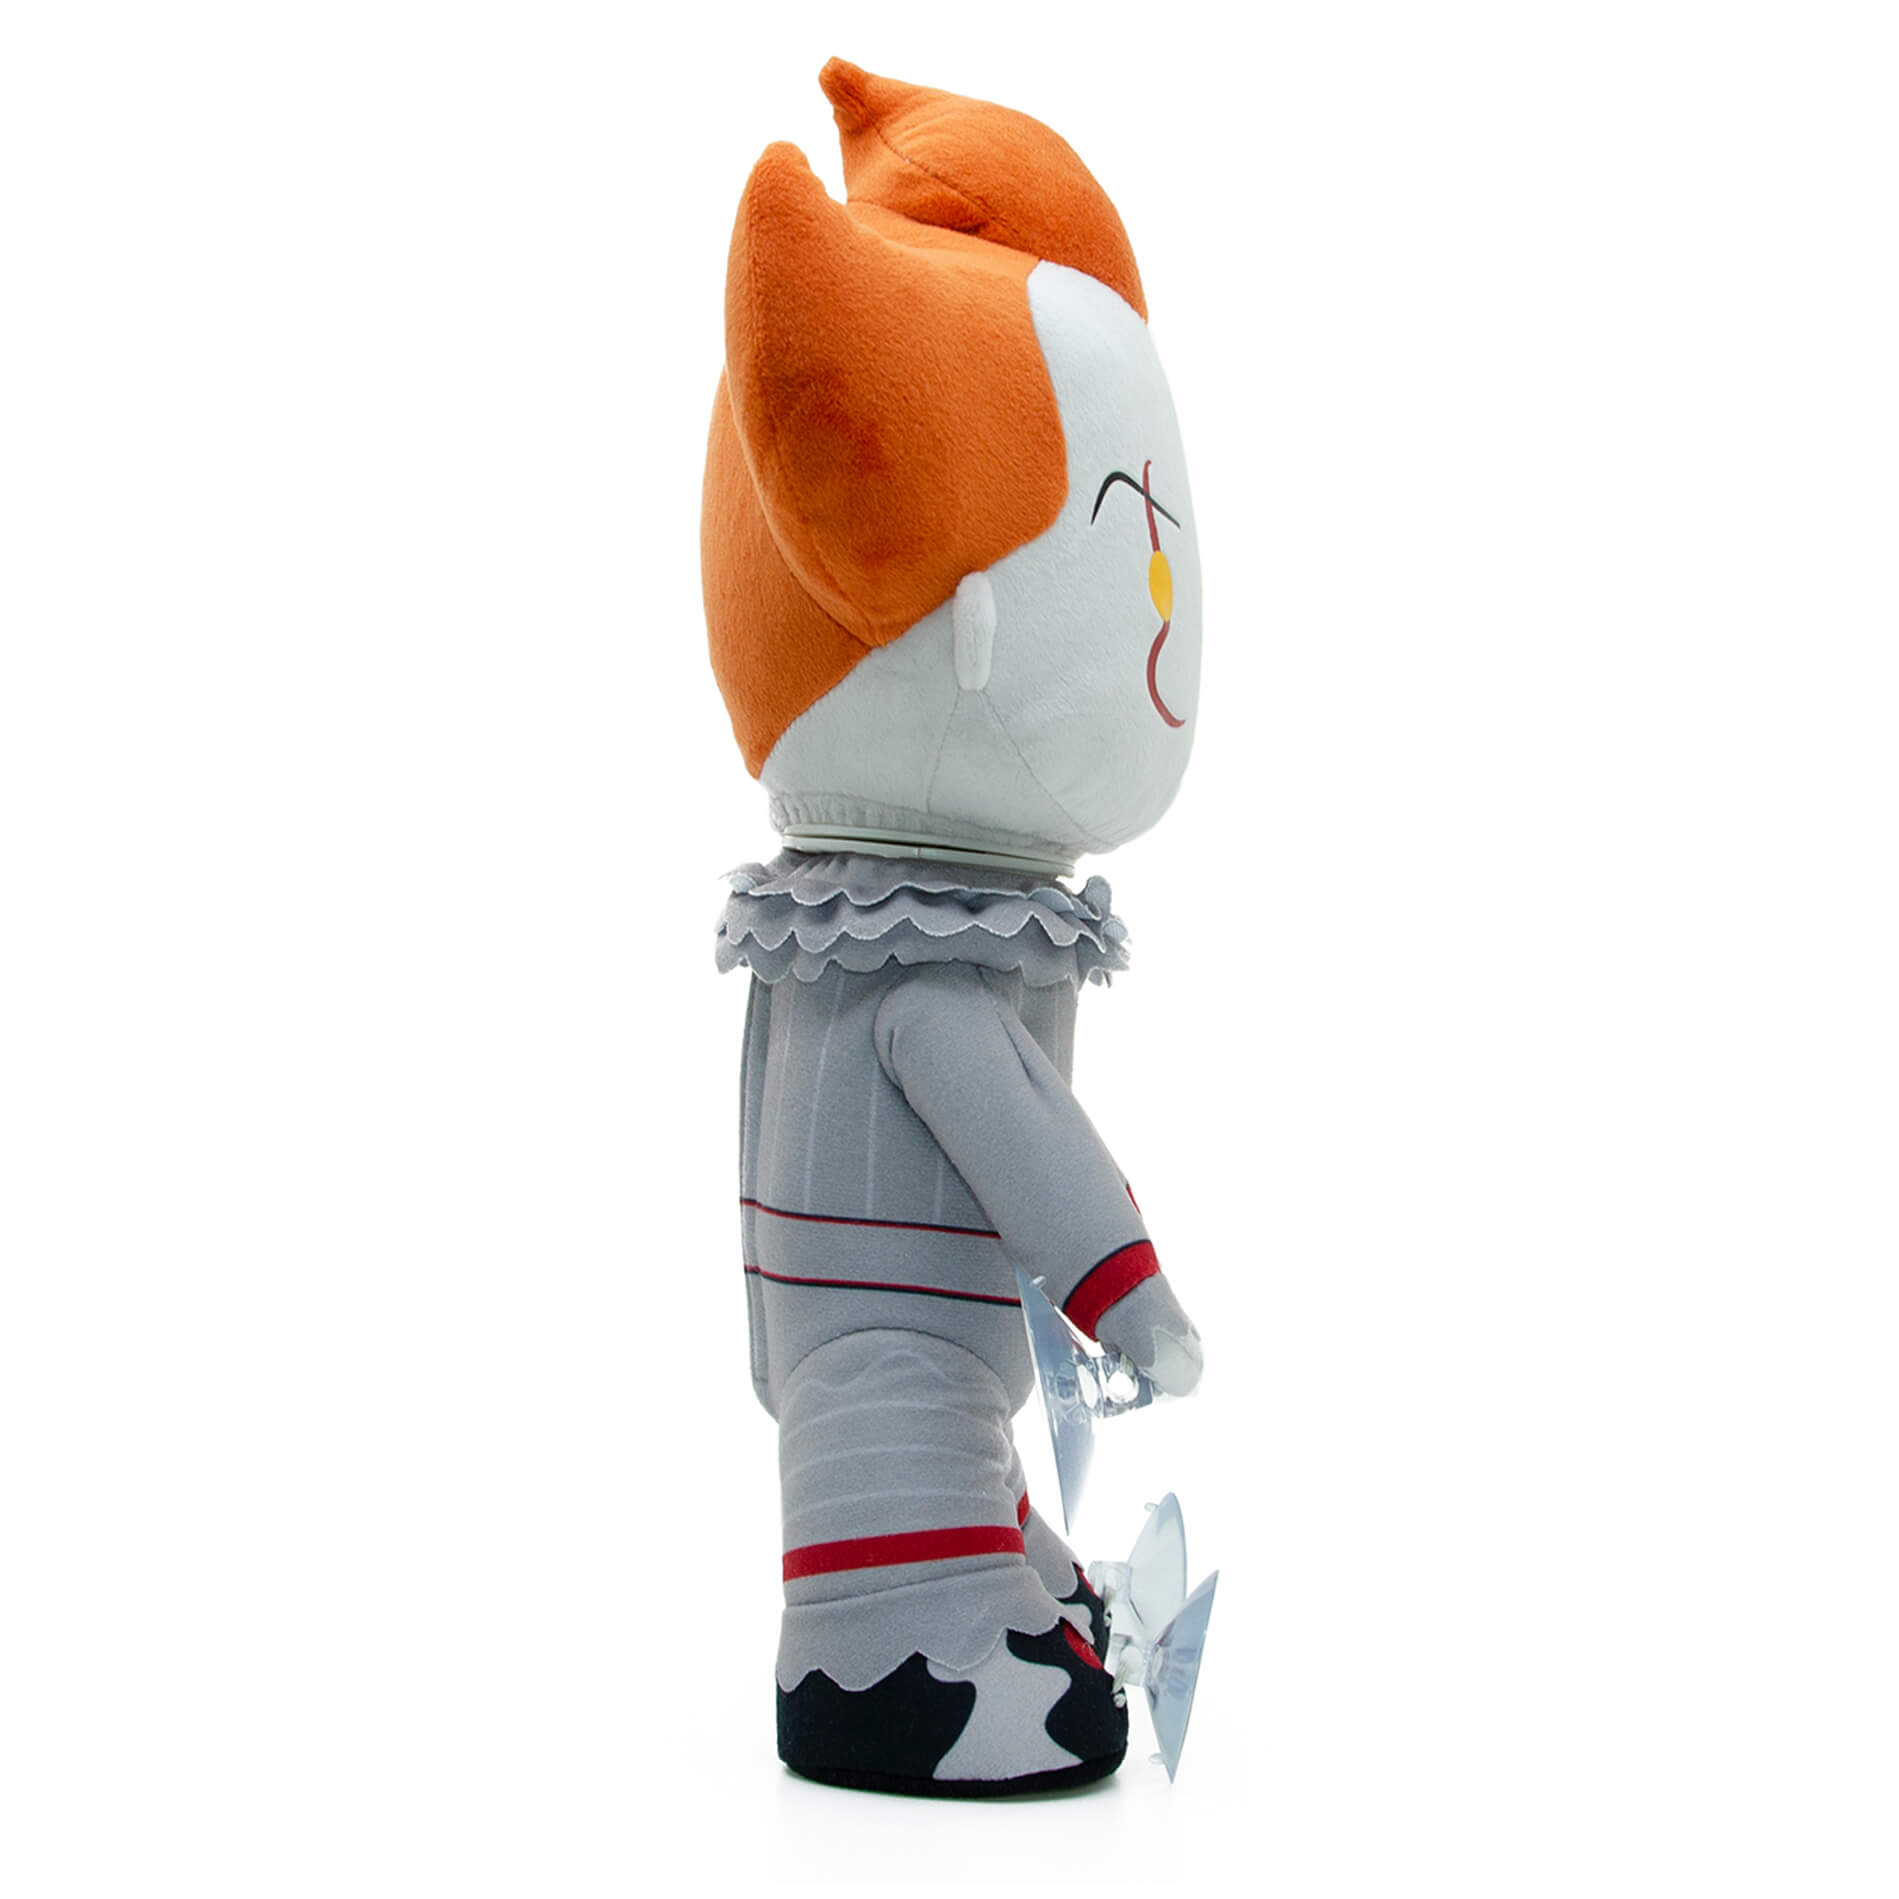 Horror IT Creepy Pennywise 12” Soft Toy - Includes motion sensors, sounds and lights - YuMeToys